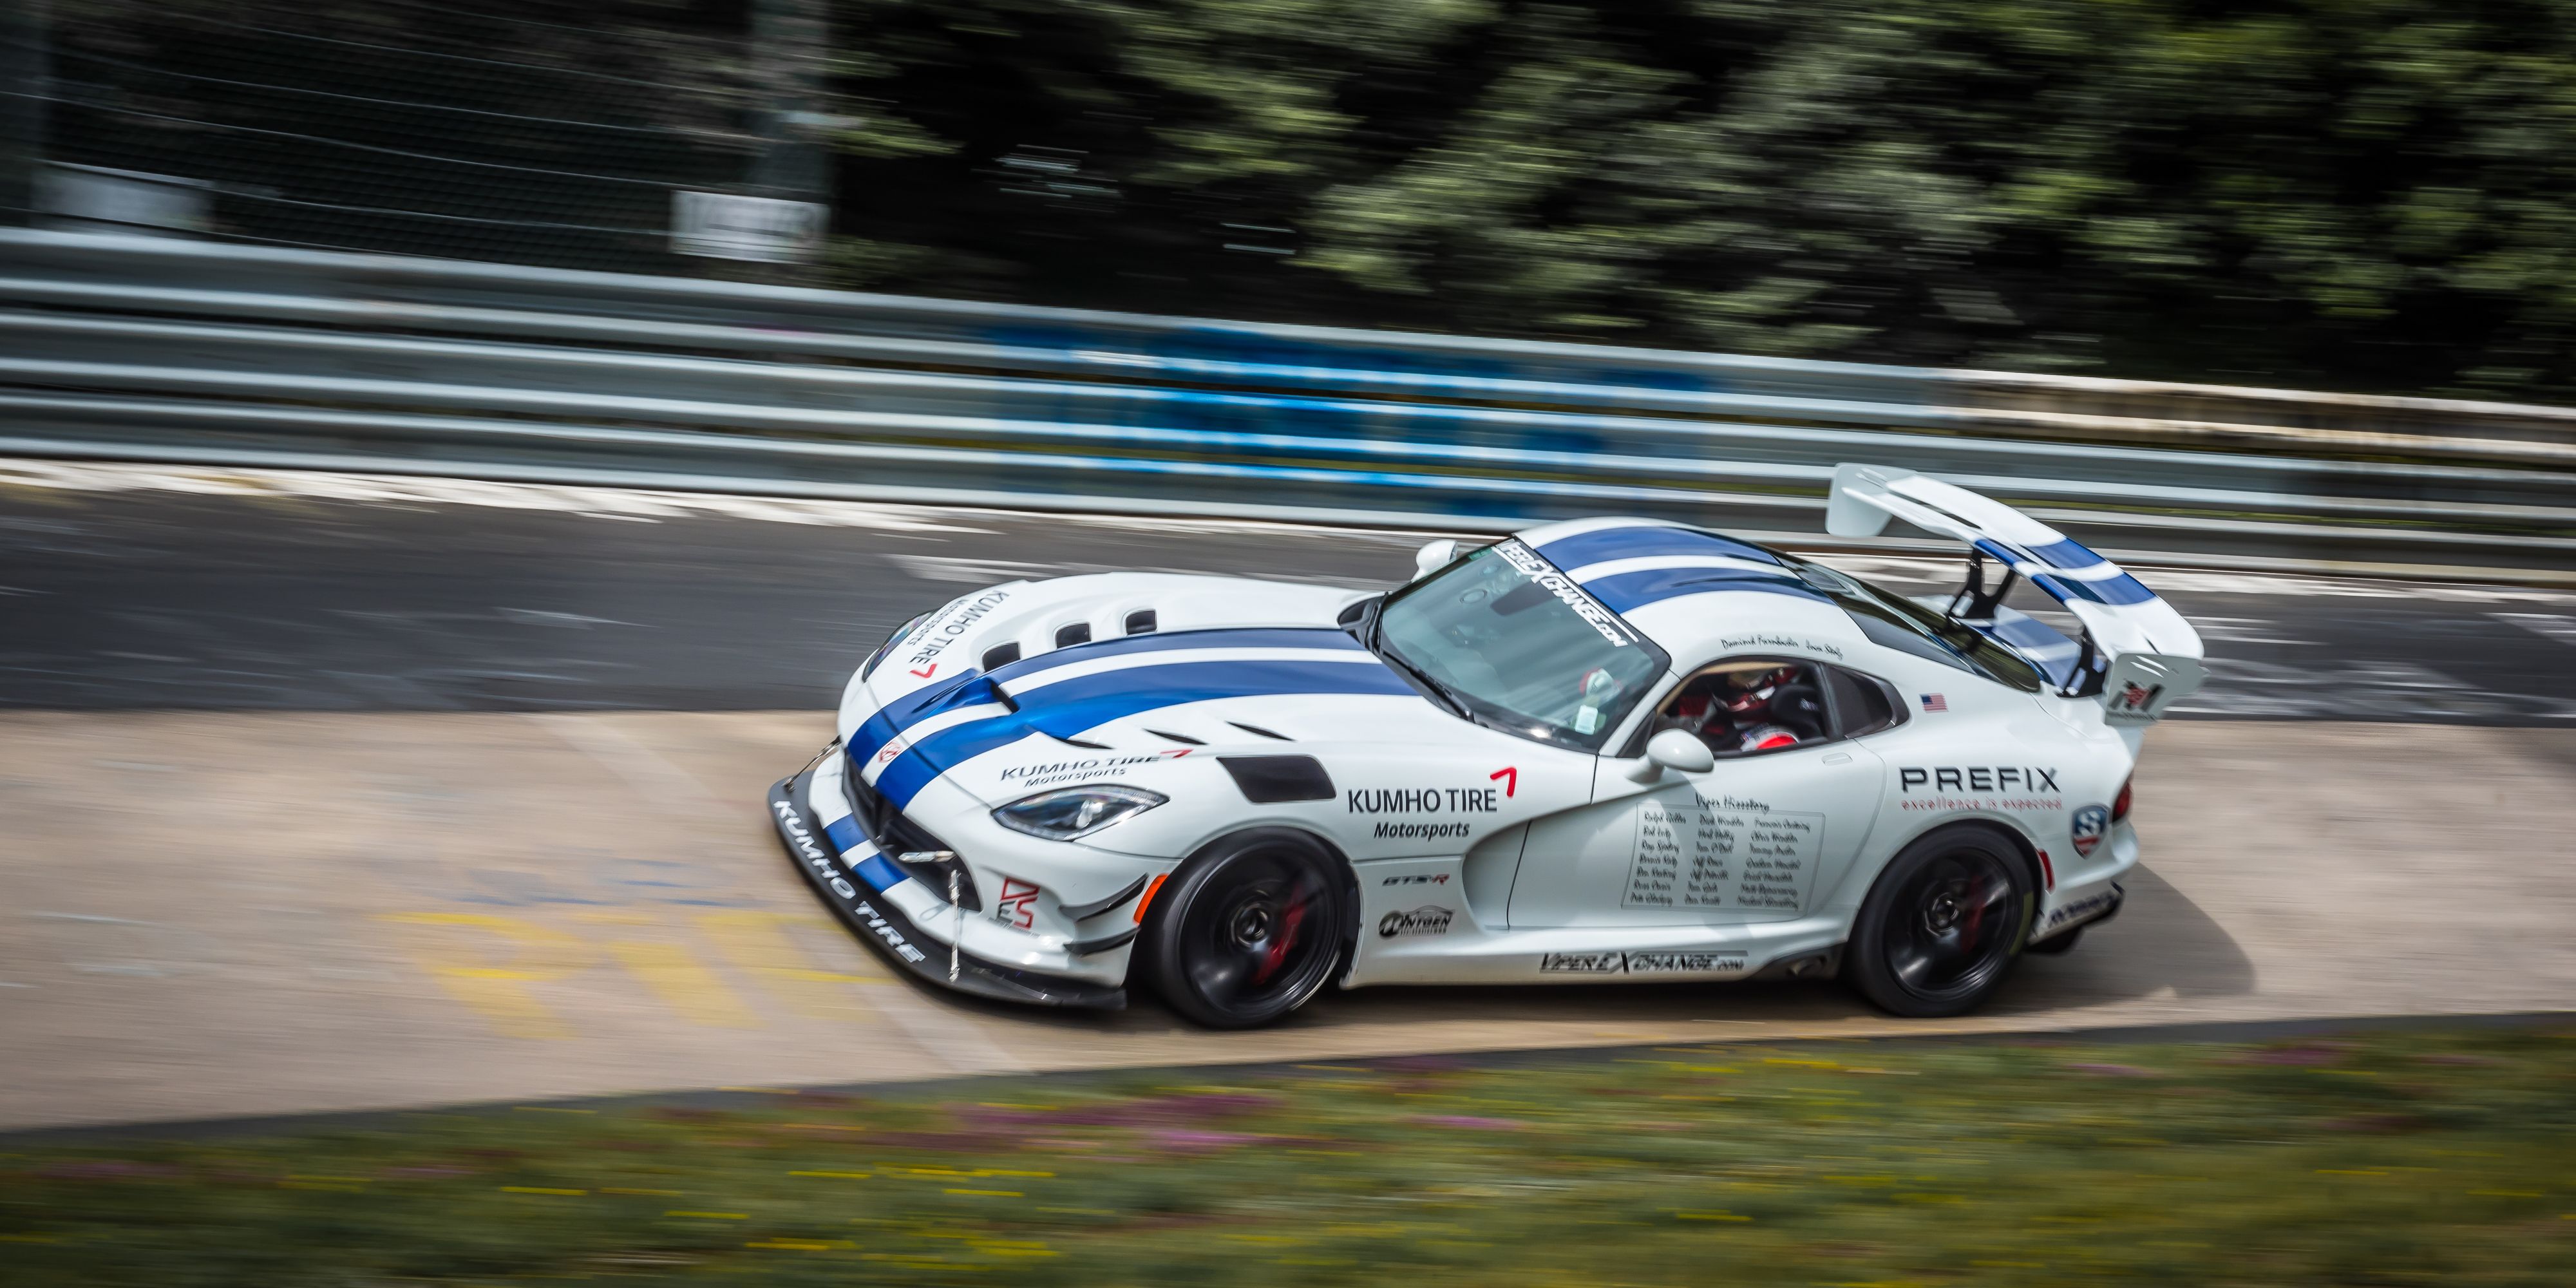 Dodge Viper Acr Sets 7 01 3 Lap Time In Final Nurburgring Attempt